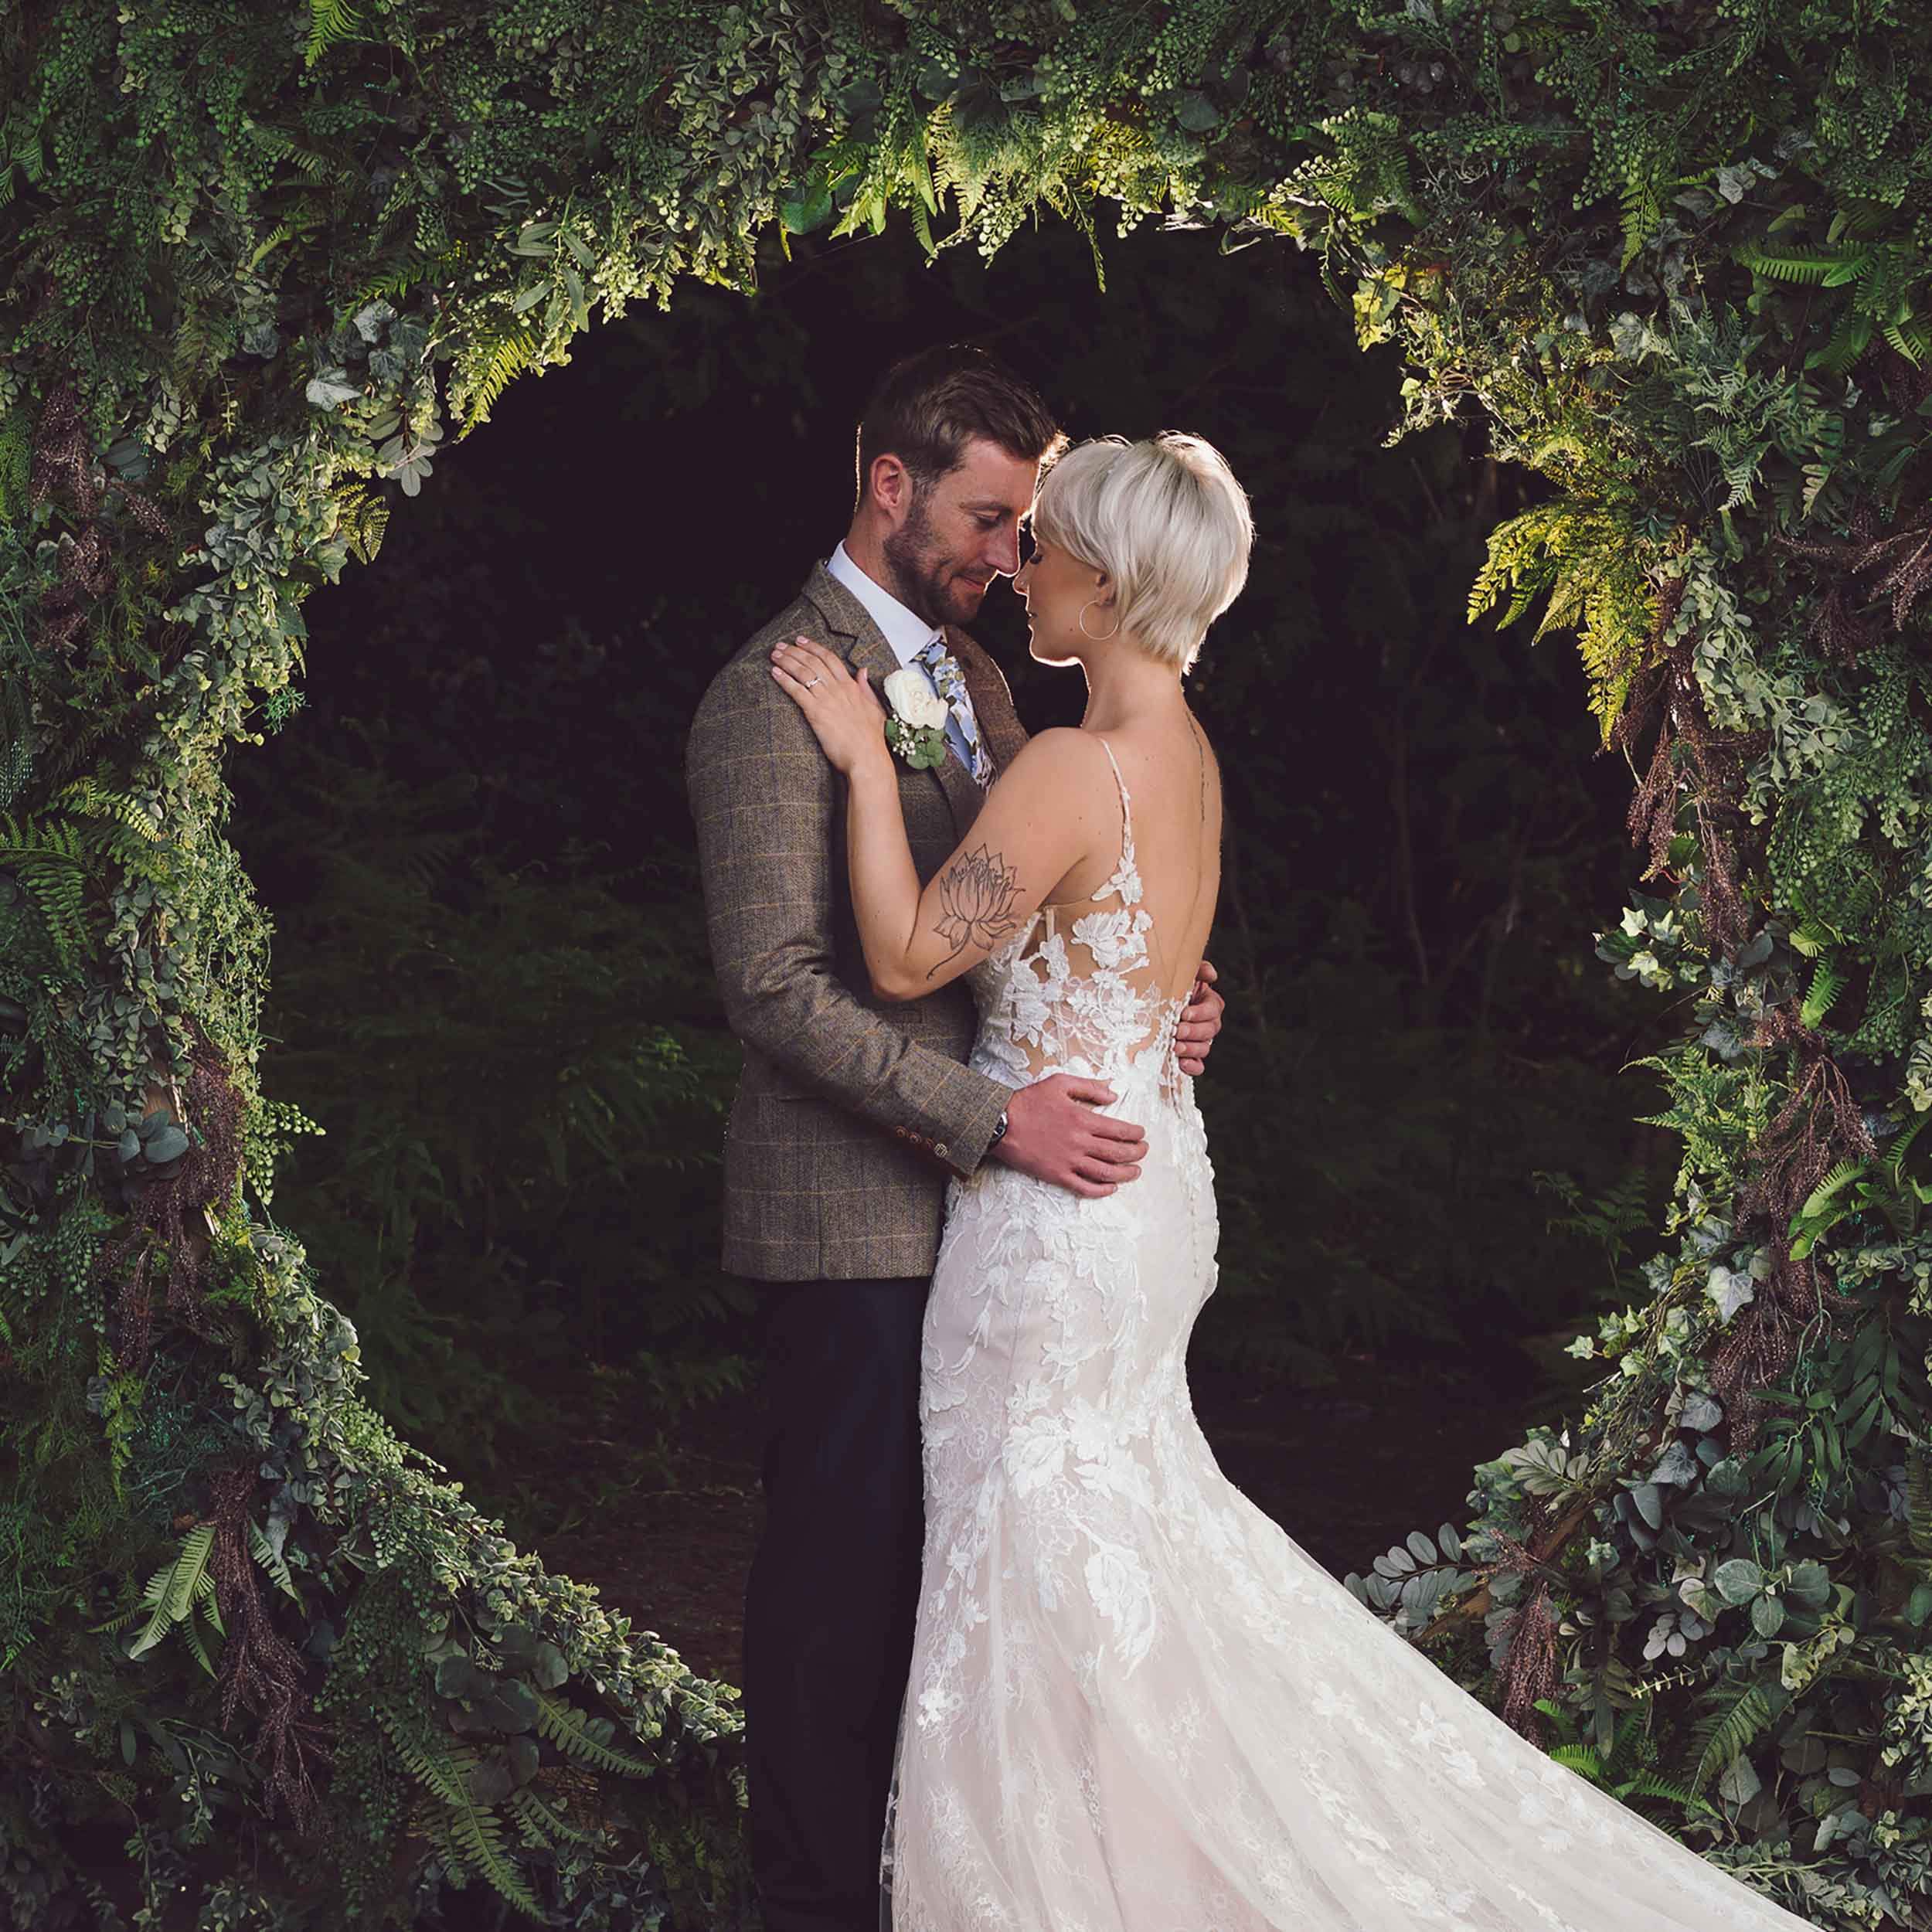 Bride & Groom embrace in front of foliage circle at North Wales wedding venue